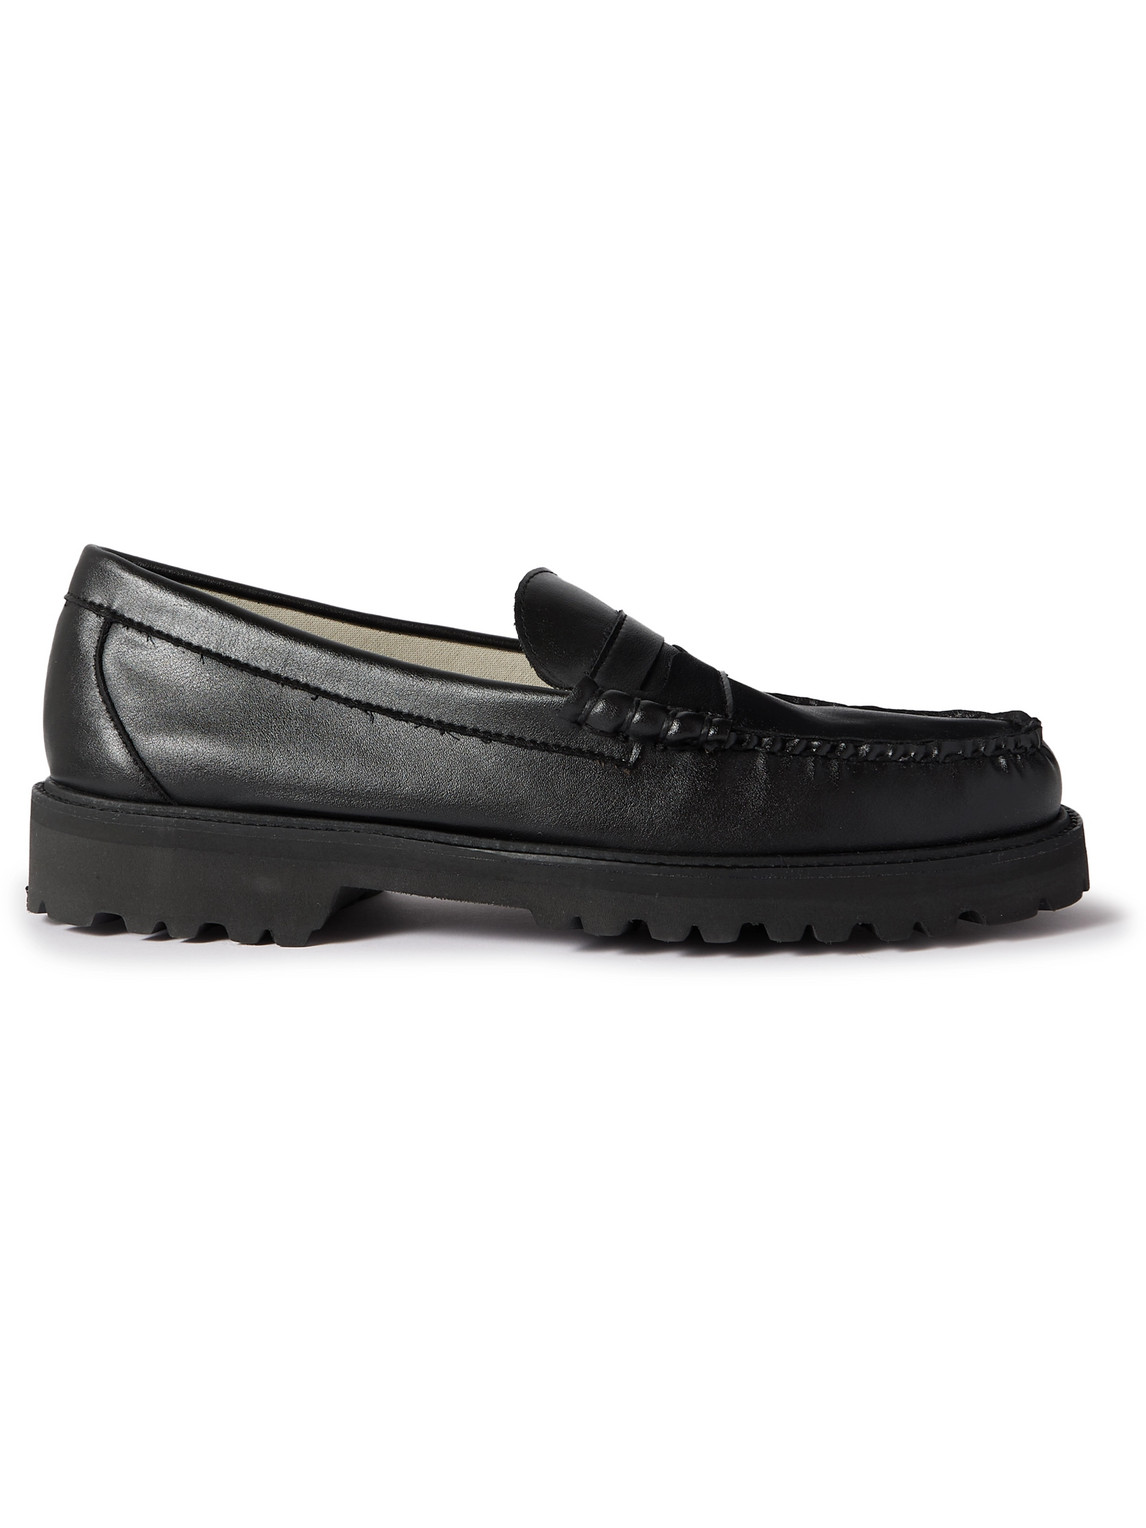 Weejun 90 Cactus Leather Penny Loafers